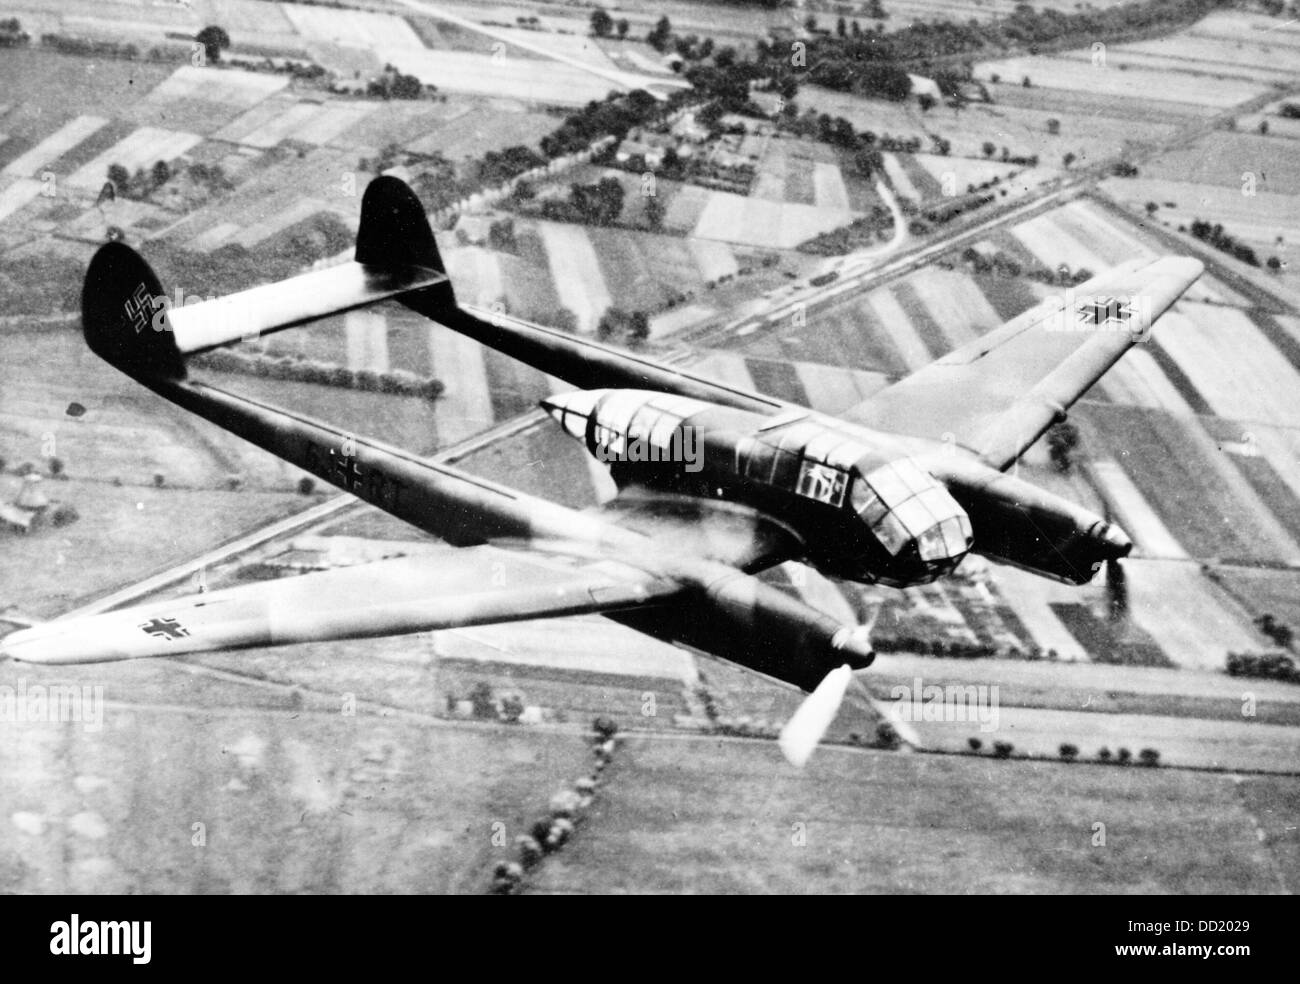 The close reconnaissance aircraft Focke-Wulf Fw 189 ('Uhu' - 'Eagle Owl') in flight in March 1941. Place unknown. The Nazi Propaganda! on the back of the picture is dated 31 March 1941: 'Focke-Wulf Fw 189 - the most modern close reconnaissance aircraft of the world! The first twin-boom aircraft of the German Luftwaffe, which was developed on the basis of the most recent progress in the knowledge about flight technology, is a fundamental part of the German air superiority. The important reconnaissance activity of the Luftwaffe, which ensures the leadership of the Wehrmacht, got an important wea Stock Photo